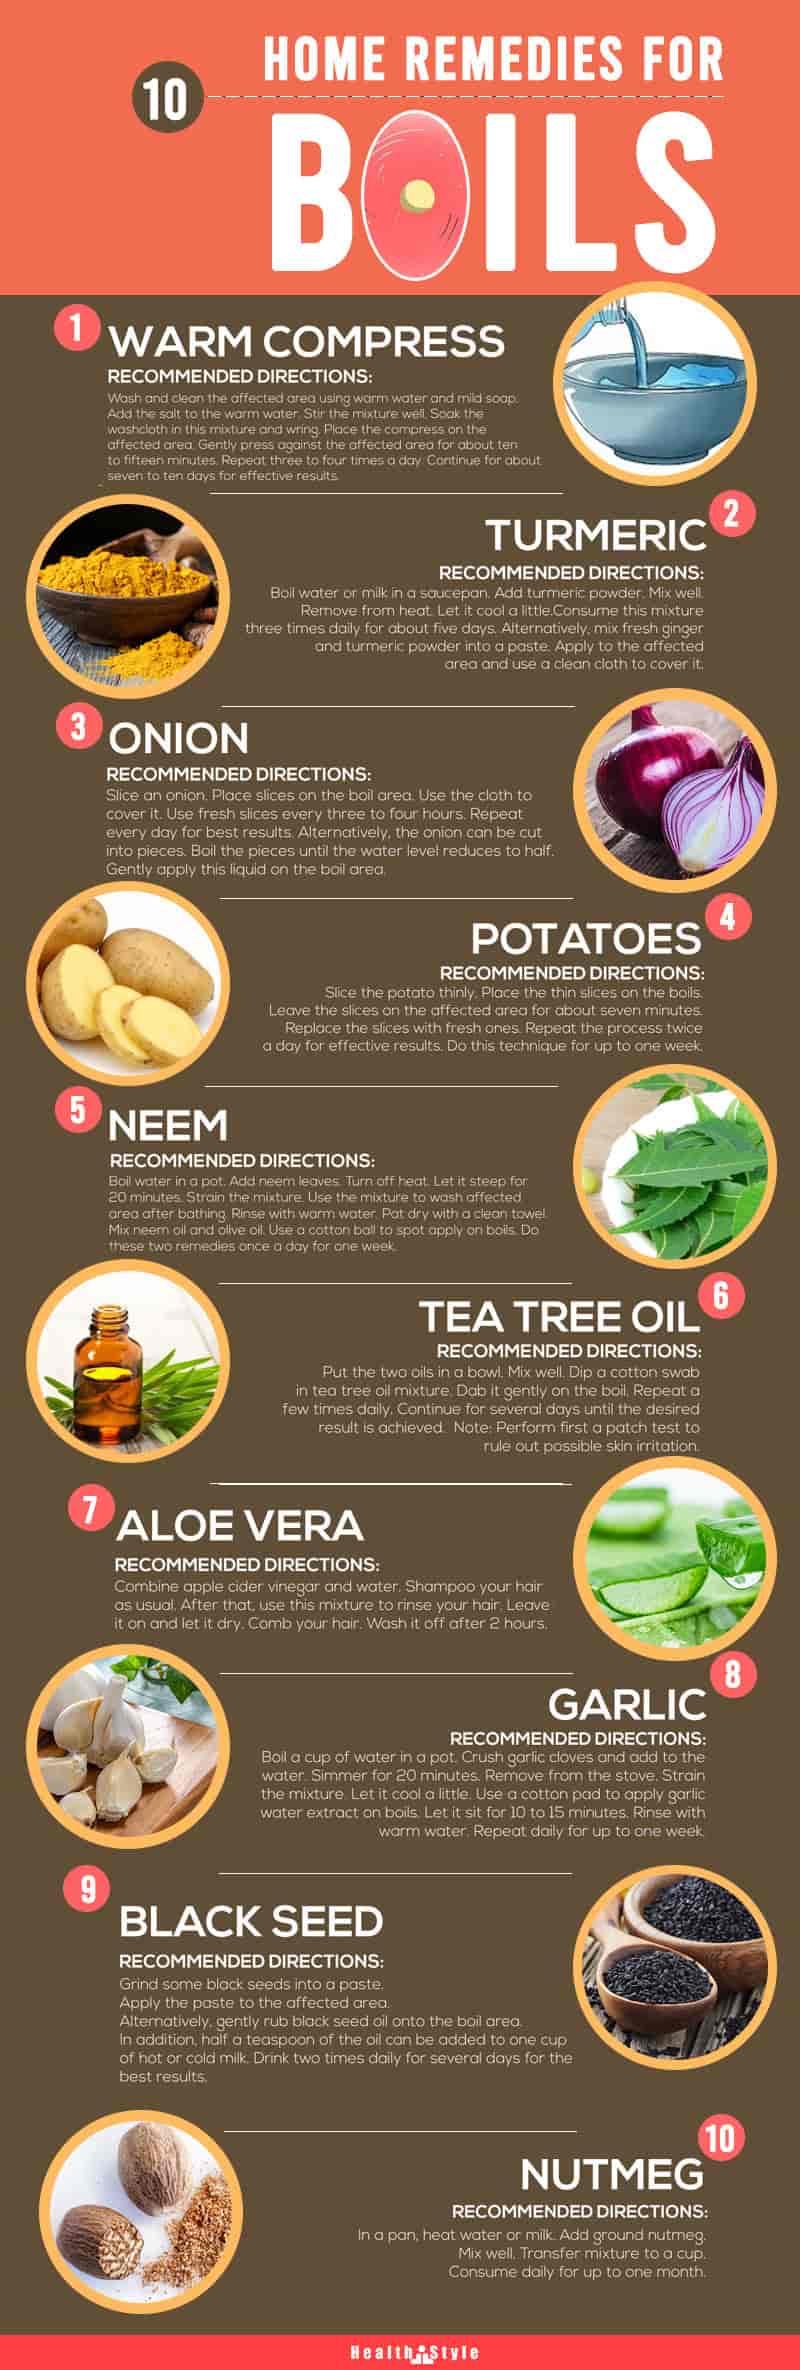 Home remedies for boils infographic